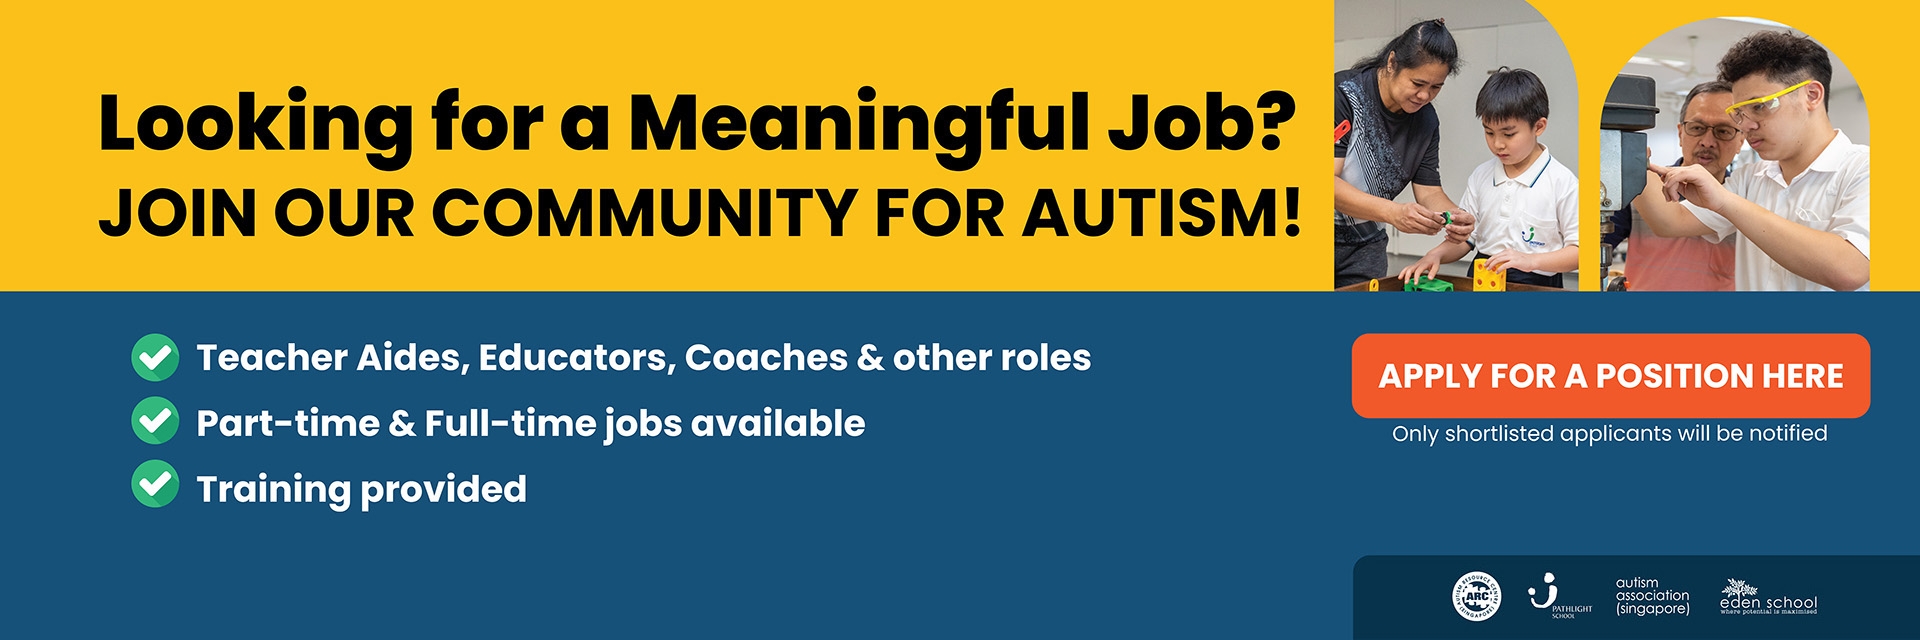 Looking for a meaningful job? Click here to join our Community for Autism